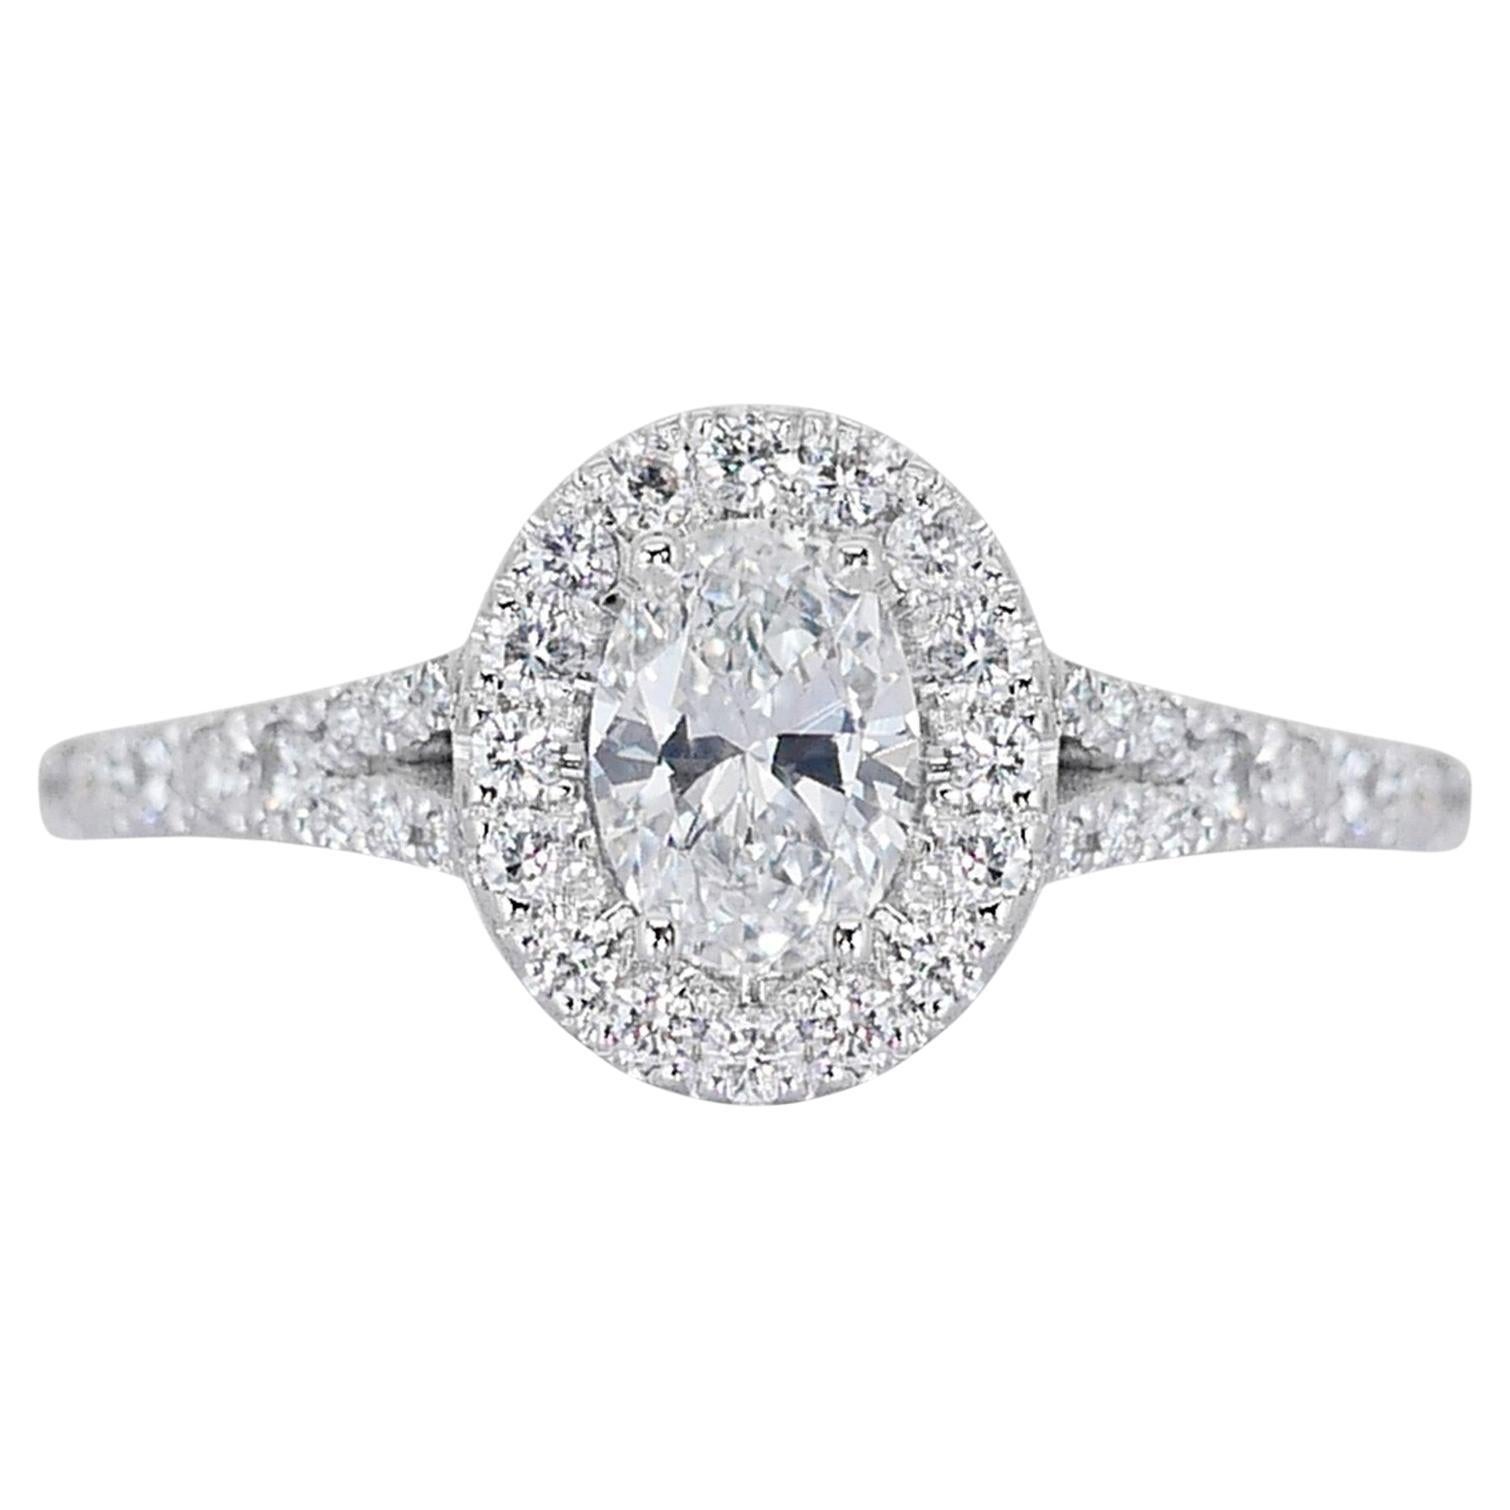 Exquisite 1.04ct Oval Diamond Halo Ring in 18k White Gold - GIA Certified